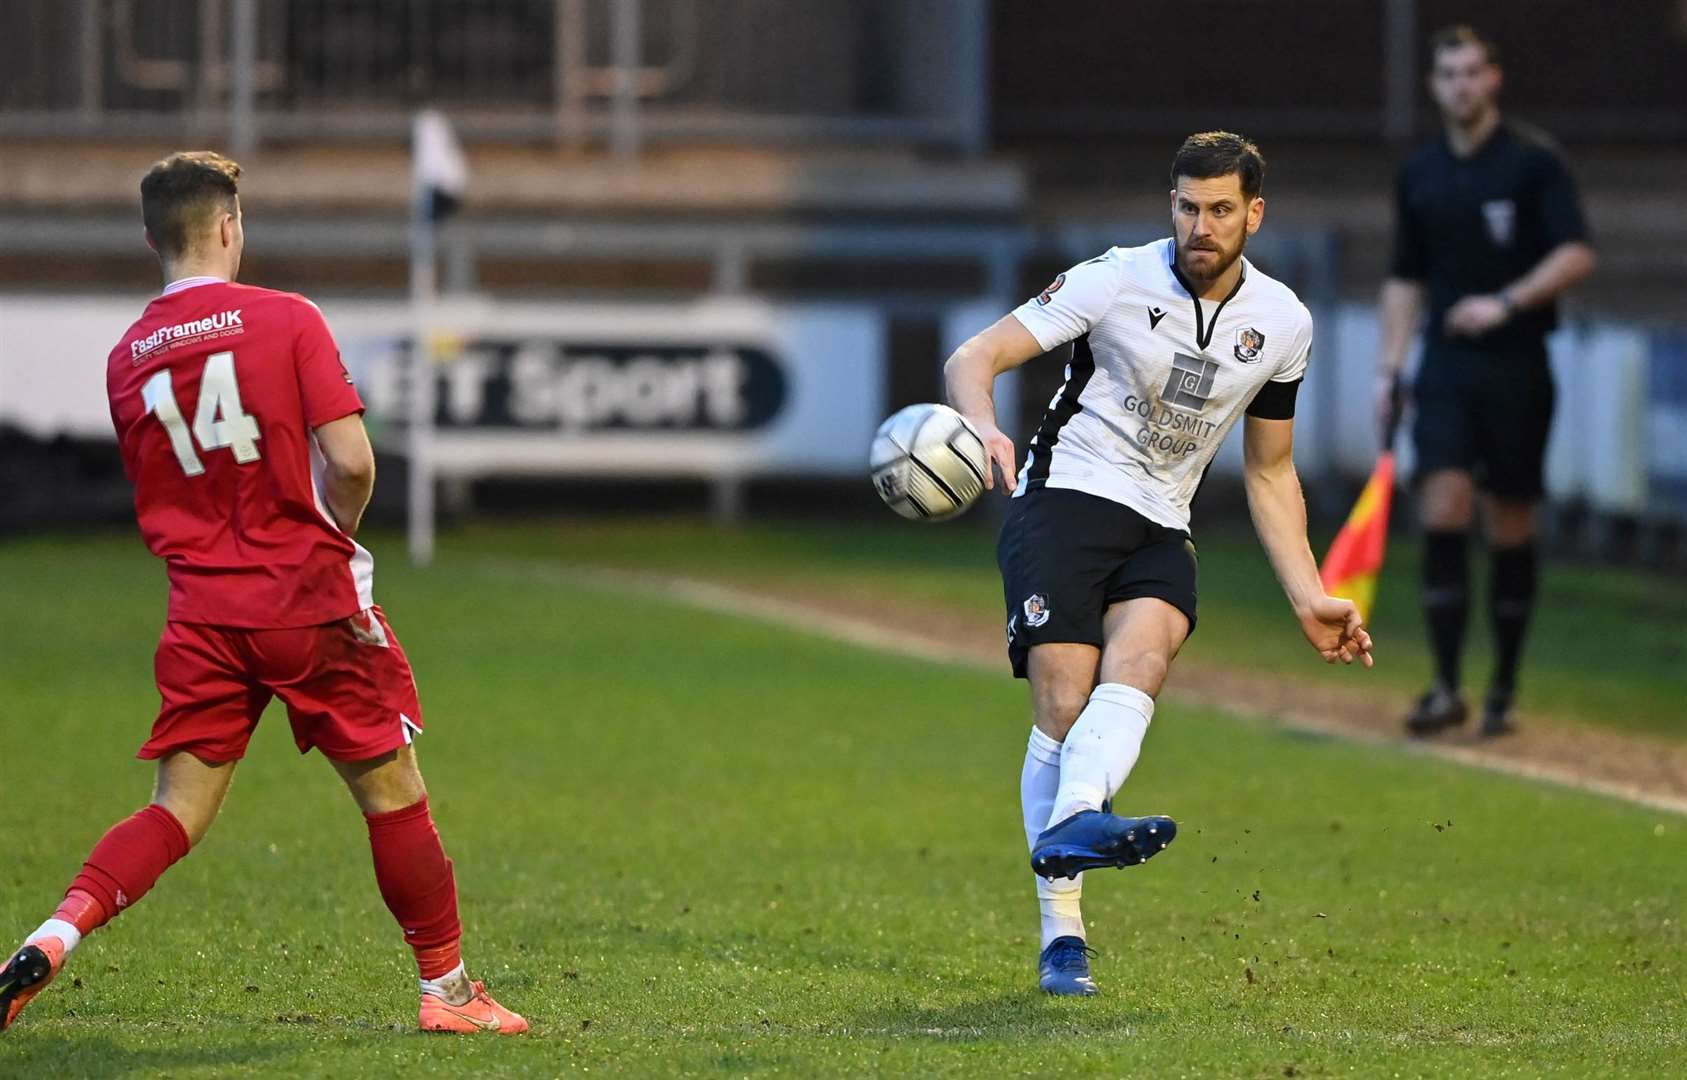 Covid times as Tom Bonner plays the ball forward at a virtually-empty Princes Park for Dartford against Hungerford in 2021. Picture: Keith Gillard